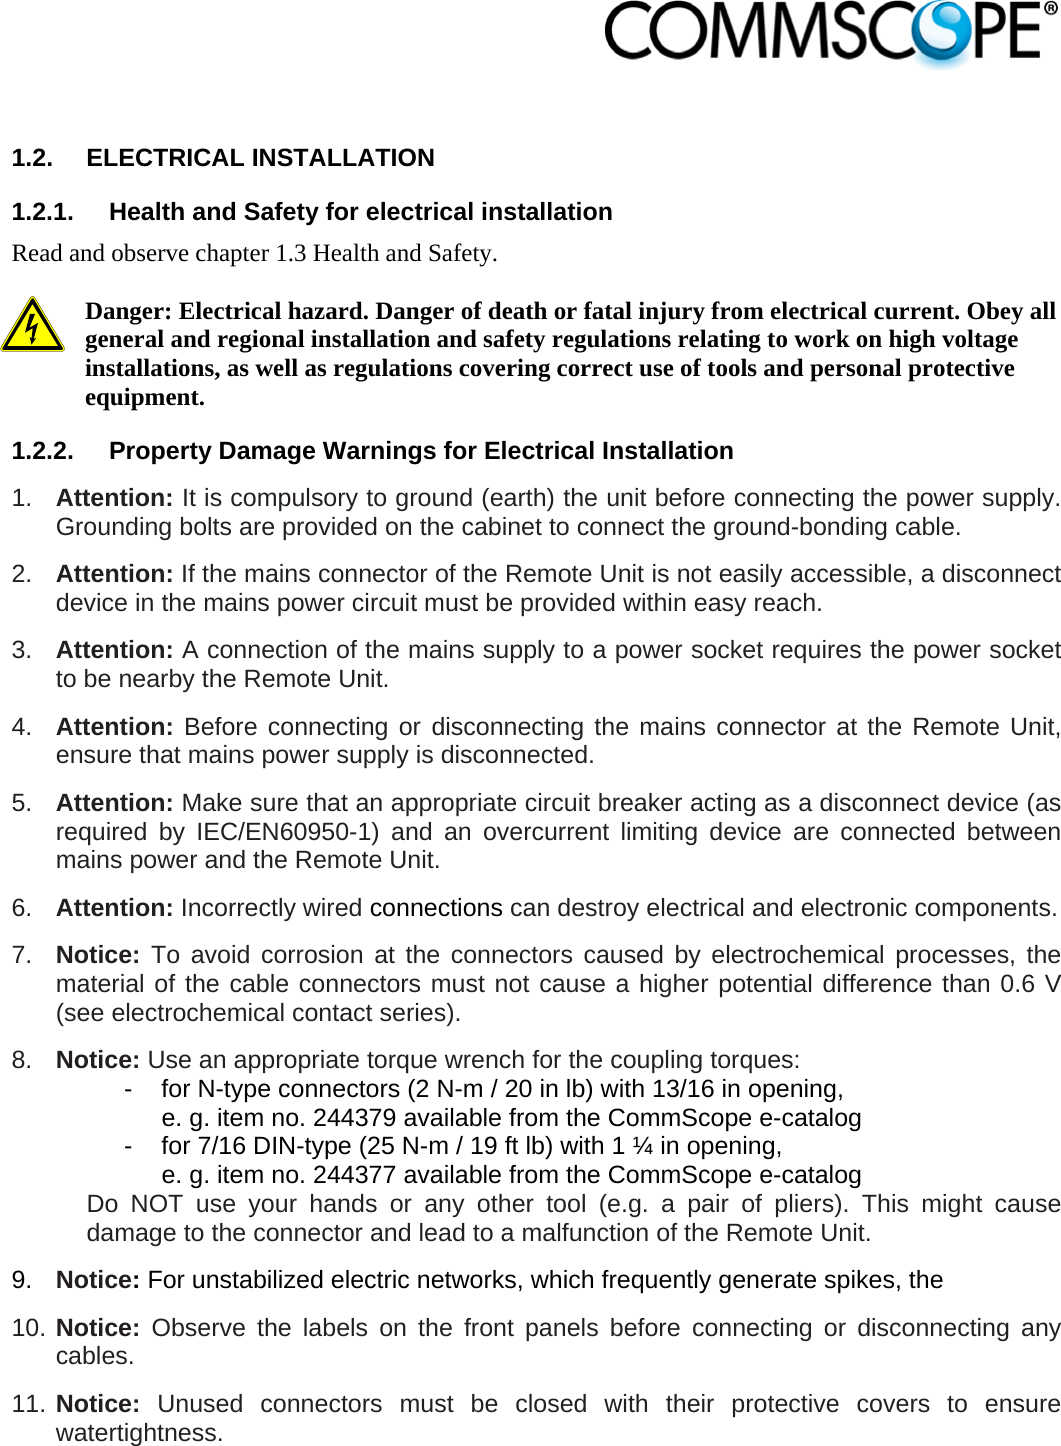                             1.2. ELECTRICAL INSTALLATION 1.2.1.  Health and Safety for electrical installation Read and observe chapter 1.3 Health and Safety.  Danger: Electrical hazard. Danger of death or fatal injury from electrical current. Obey all general and regional installation and safety regulations relating to work on high voltage installations, as well as regulations covering correct use of tools and personal protective equipment. 1.2.2.  Property Damage Warnings for Electrical Installation 1.  Attention: It is compulsory to ground (earth) the unit before connecting the power supply. Grounding bolts are provided on the cabinet to connect the ground-bonding cable.  2.  Attention: If the mains connector of the Remote Unit is not easily accessible, a disconnect device in the mains power circuit must be provided within easy reach. 3.  Attention: A connection of the mains supply to a power socket requires the power socket to be nearby the Remote Unit. 4.  Attention: Before connecting or disconnecting the mains connector at the Remote Unit, ensure that mains power supply is disconnected. 5.  Attention: Make sure that an appropriate circuit breaker acting as a disconnect device (as required by IEC/EN60950-1) and an overcurrent limiting device are connected between mains power and the Remote Unit. 6.  Attention: Incorrectly wired connections can destroy electrical and electronic components.  7.  Notice: To avoid corrosion at the connectors caused by electrochemical processes, the material of the cable connectors must not cause a higher potential difference than 0.6 V (see electrochemical contact series). 8.  Notice: Use an appropriate torque wrench for the coupling torques:   -  for N-type connectors (2 N-m / 20 in lb) with 13/16 in opening,      e. g. item no. 244379 available from the CommScope e-catalog   -  for 7/16 DIN-type (25 N-m / 19 ft lb) with 1 ¼ in opening,      e. g. item no. 244377 available from the CommScope e-catalog Do NOT use your hands or any other tool (e.g. a pair of pliers). This might cause damage to the connector and lead to a malfunction of the Remote Unit. 9.  Notice: For unstabilized electric networks, which frequently generate spikes, the  10. Notice: Observe the labels on the front panels before connecting or disconnecting any cables. 11. Notice: Unused connectors must be closed with their protective covers to ensure watertightness. 